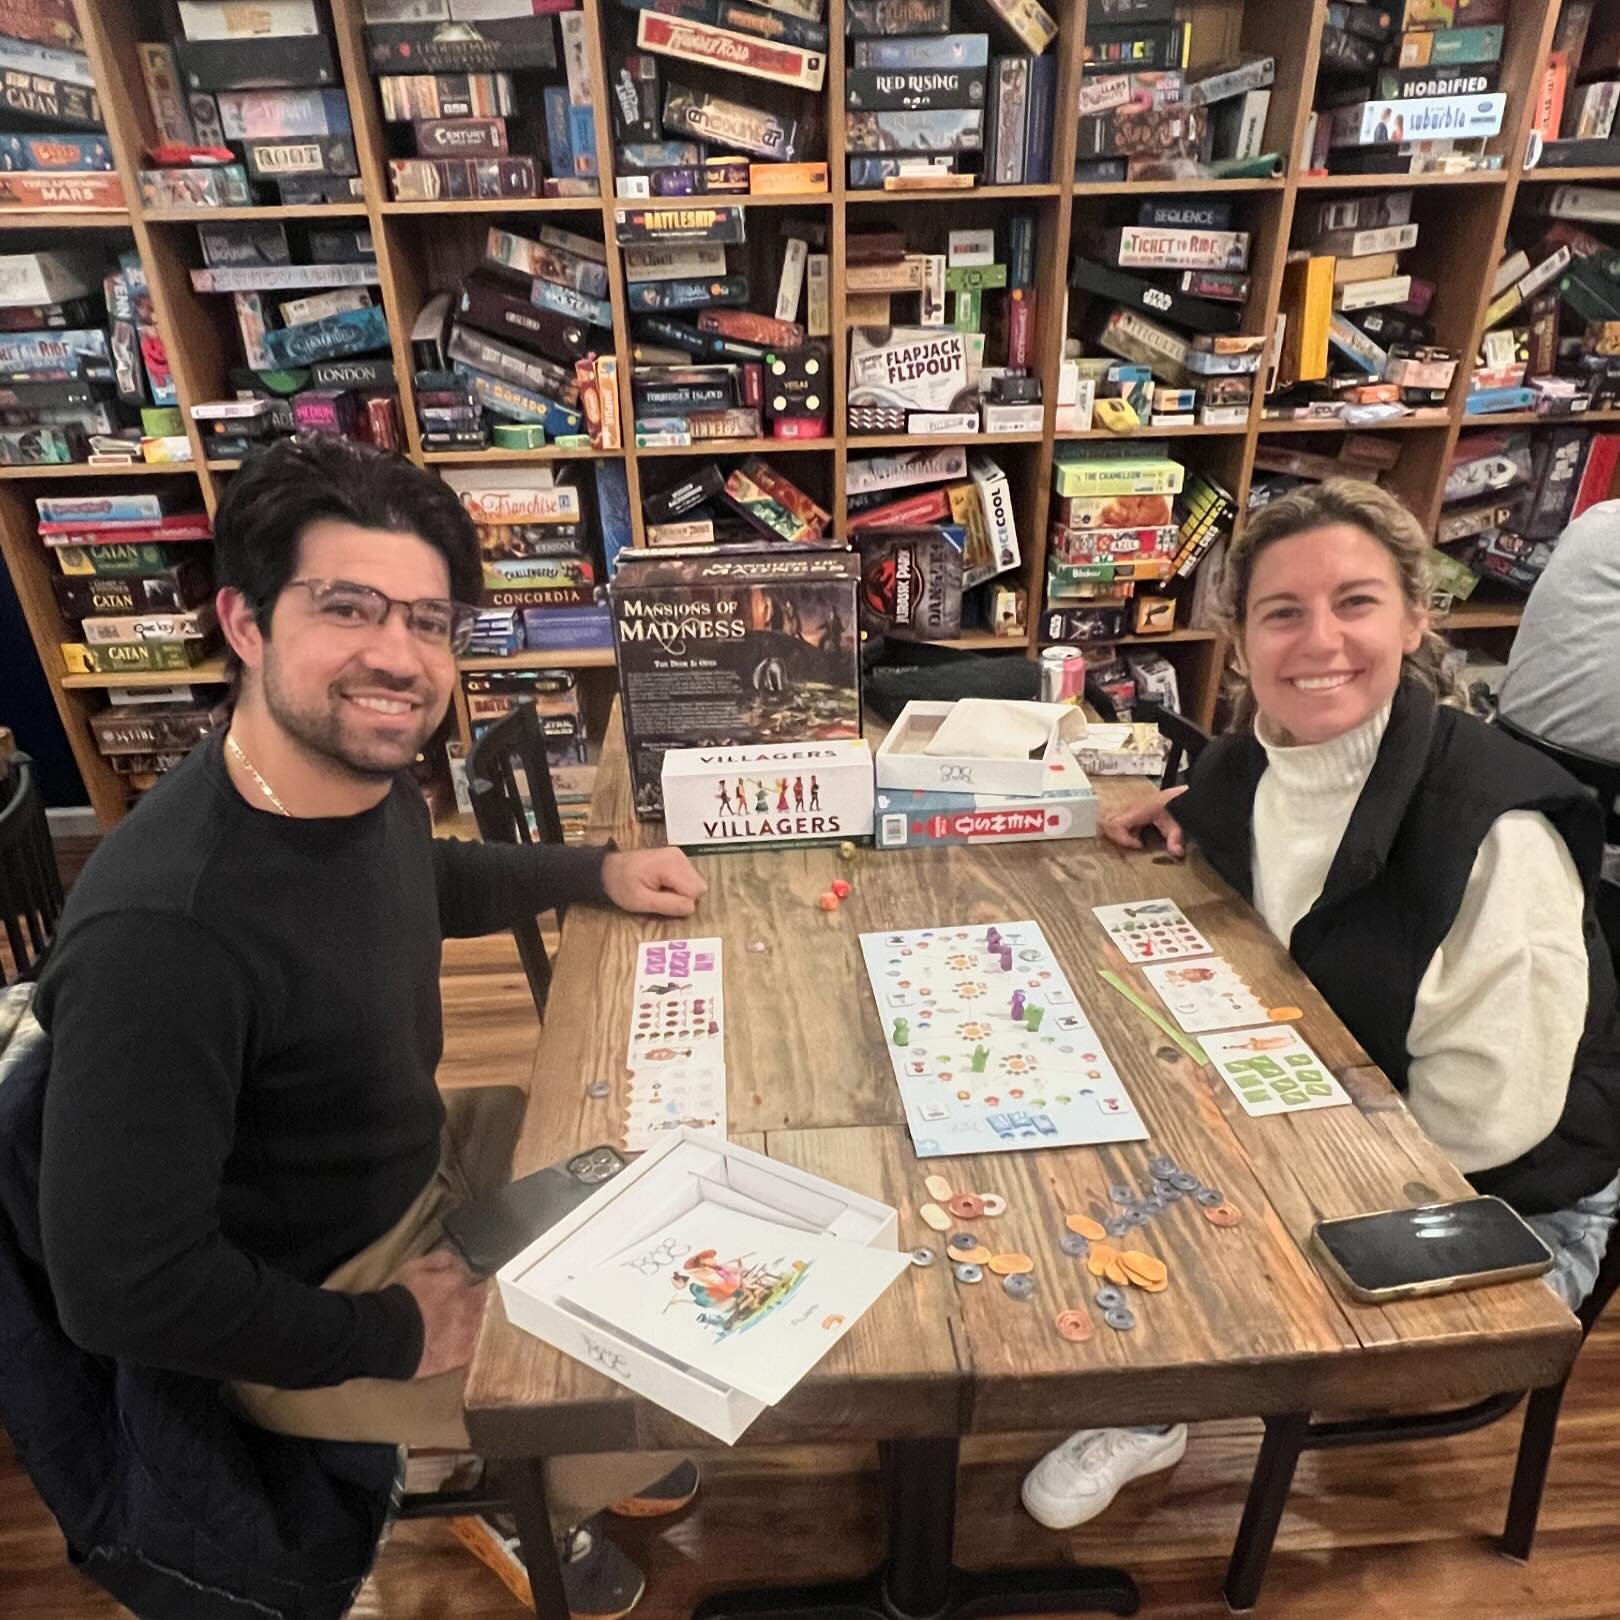 Board game weekend&hellip;continues. Open play all day long!

#mainstboardgamecafe #flgs #Unplugyourgame #screenfreekids #familyfun #nassaucounty #suffolkcounty #boardgames #huntington #huntingtonny #huntingtonvillage #huntingtonvillageny #longisland